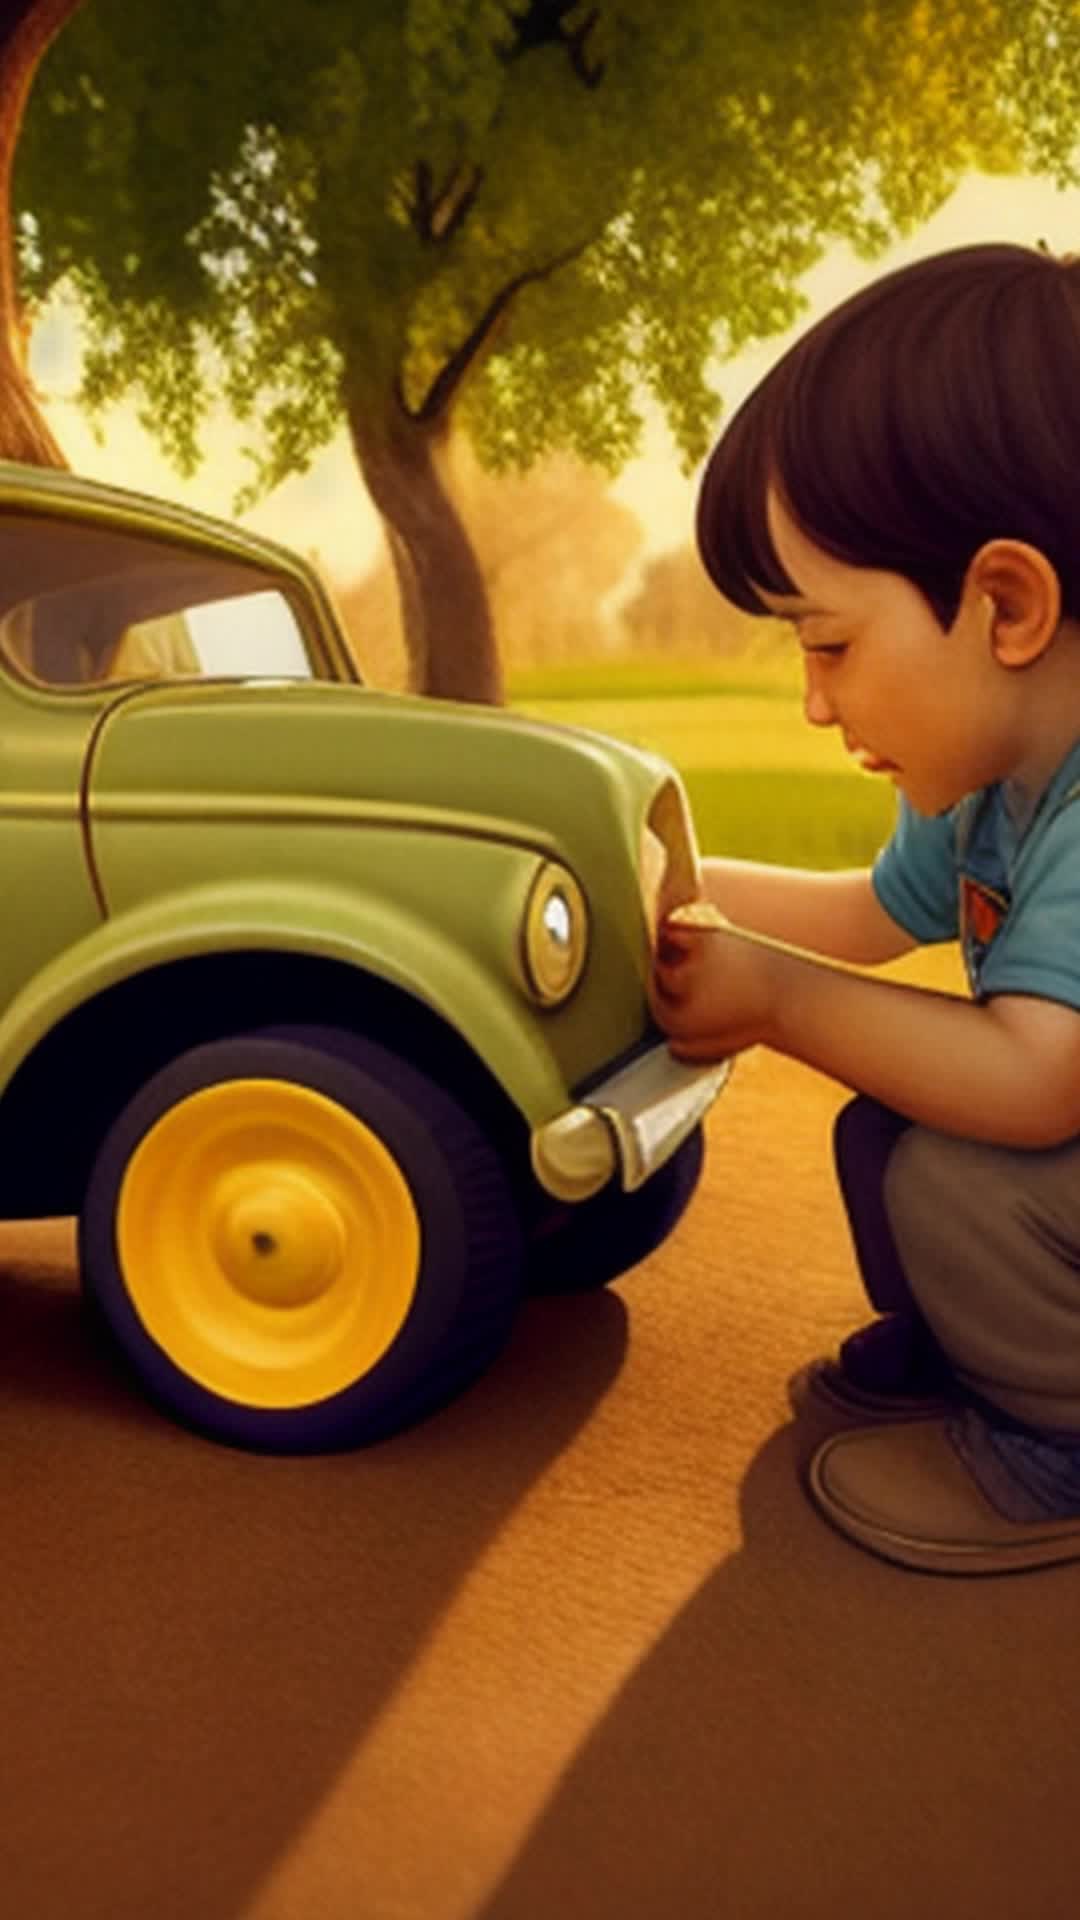 Ana, boy digging under old oak, intricate details on small and aged toy car, moment of discovery, close-up on hands and toy, gleeful expressions, warm, golden-hour lighting